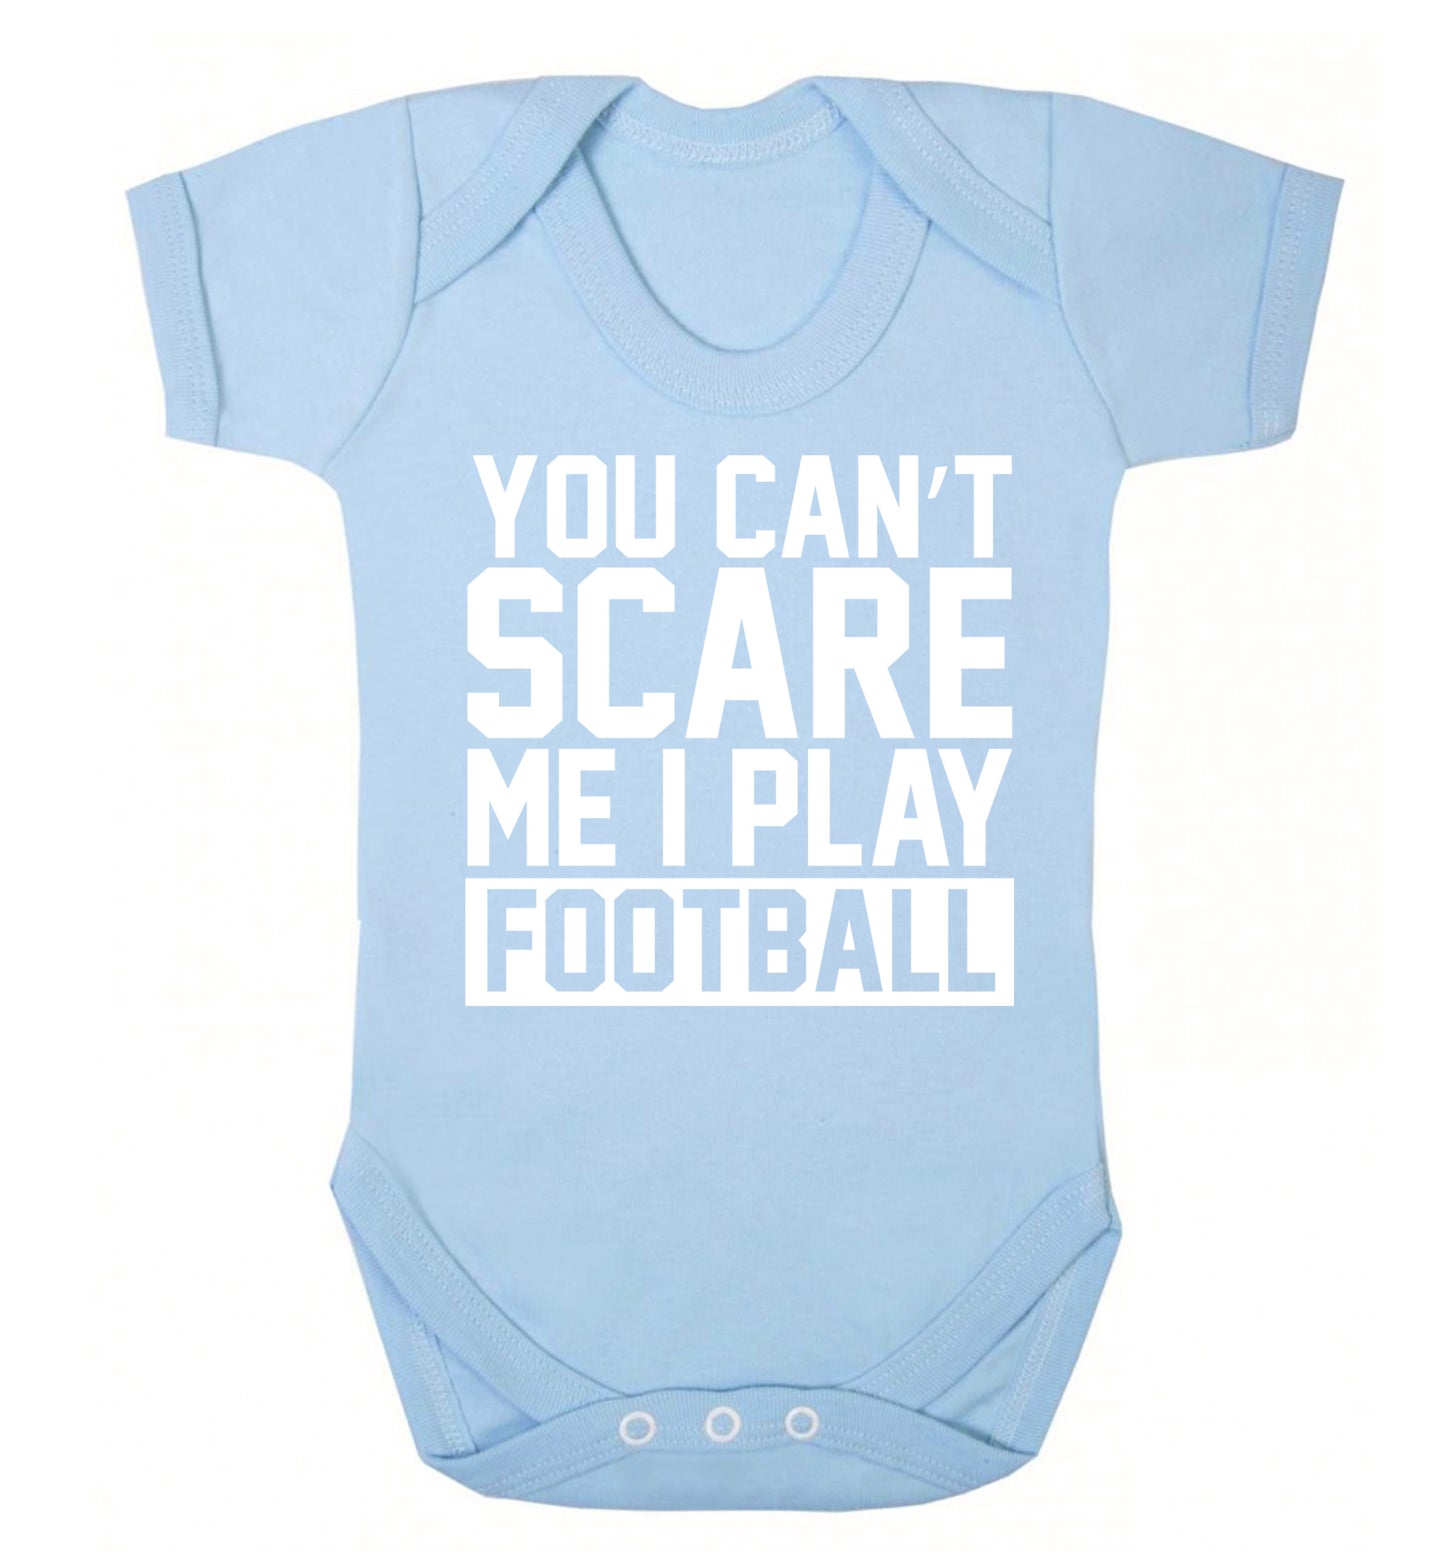 You can't scare me I play football Baby Vest pale blue 18-24 months